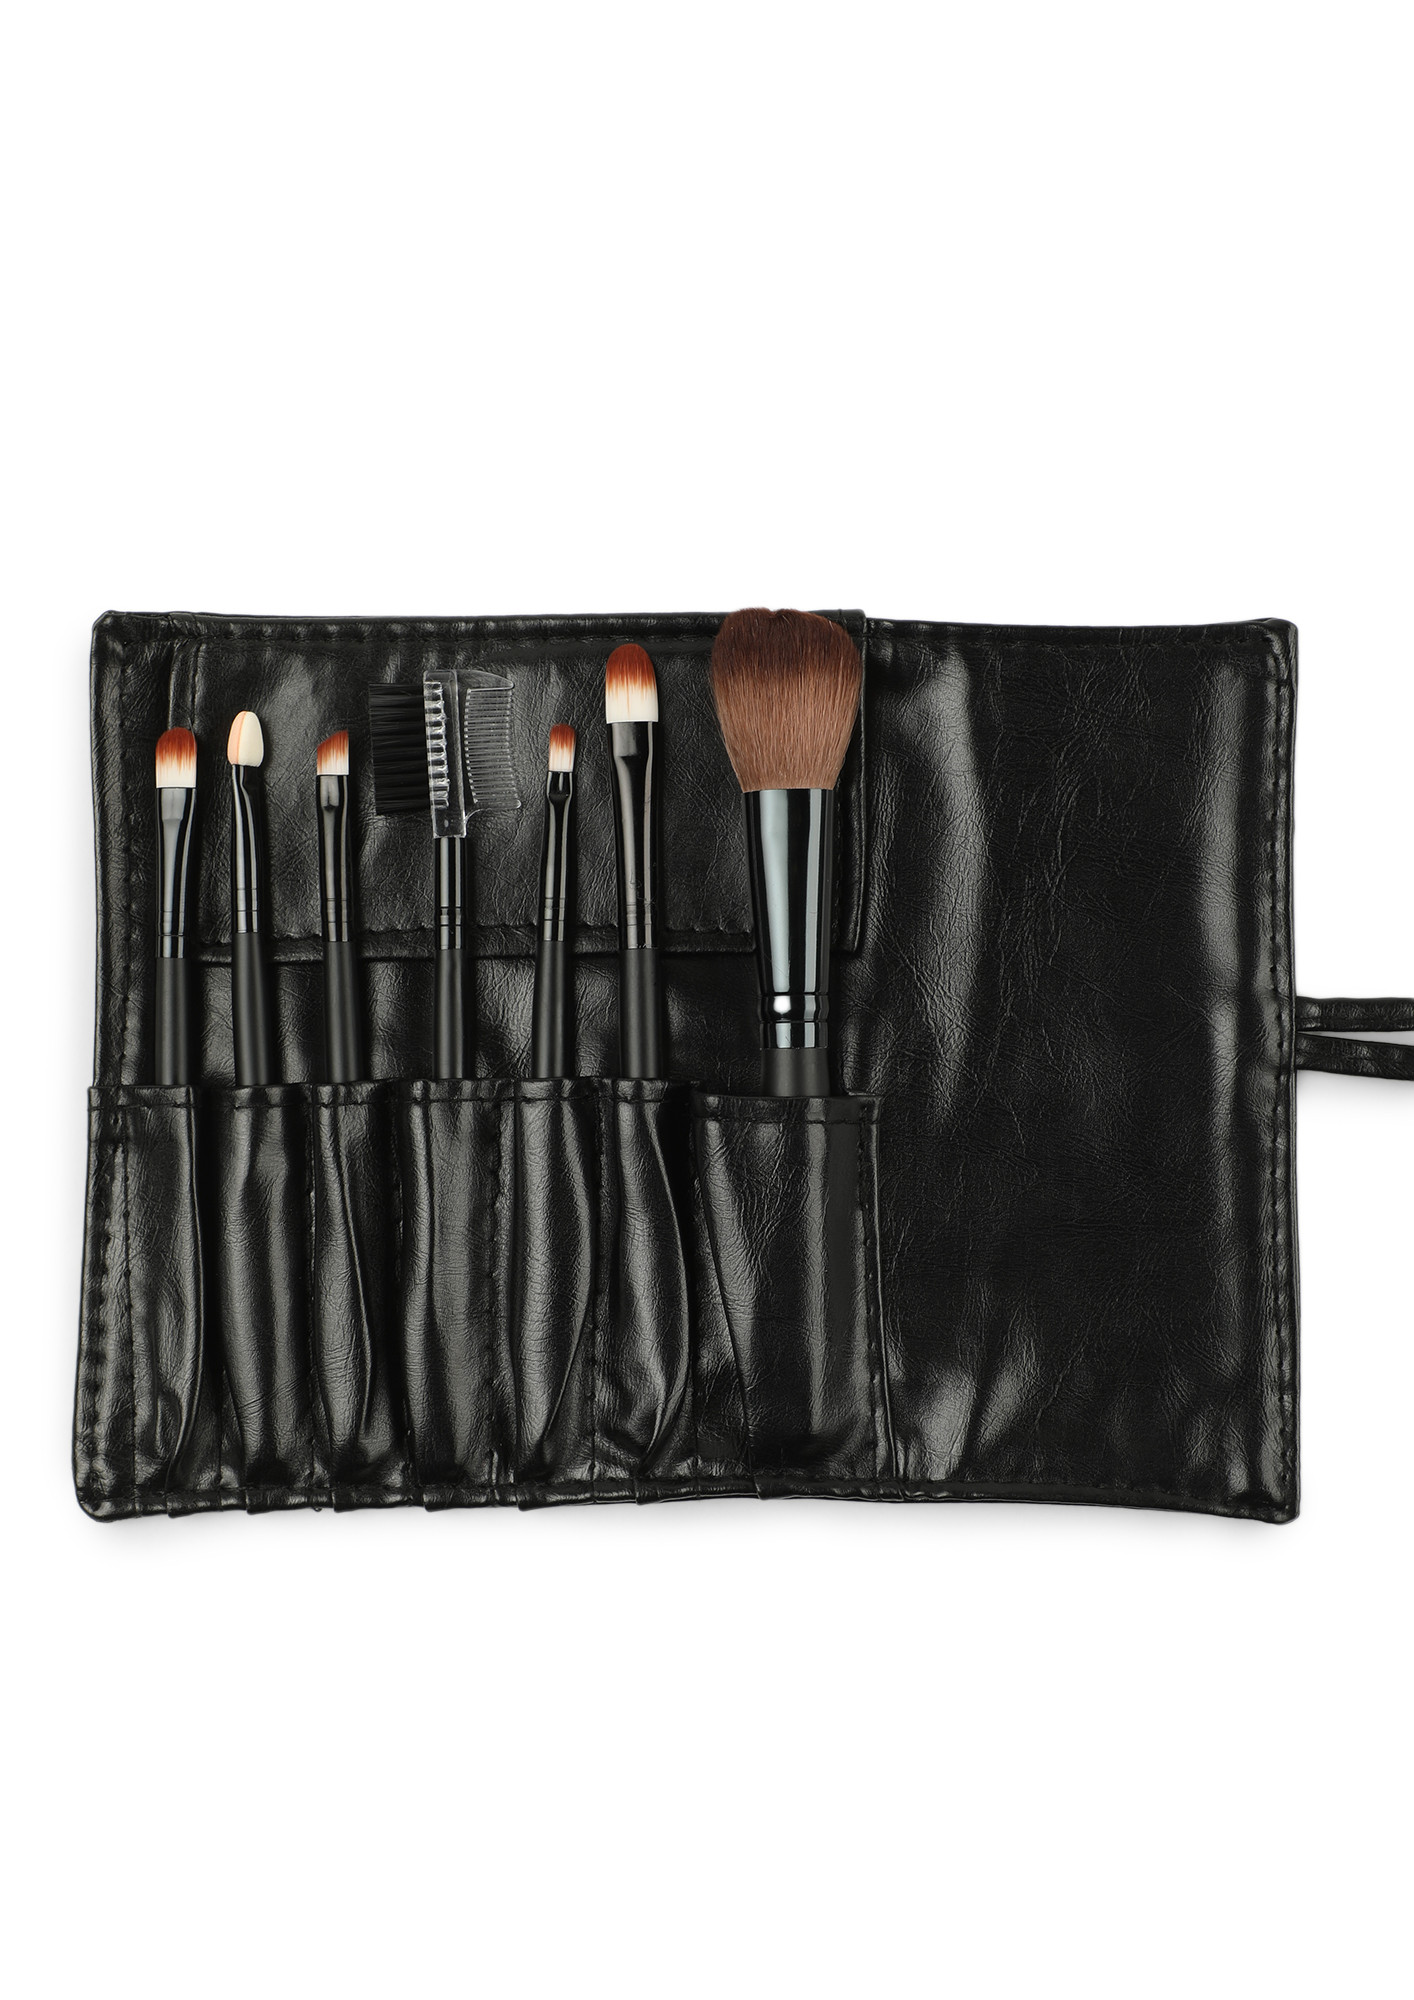 THE PERFECT GLOW BLACK MAKEUP BRUSHES - SET OF 7